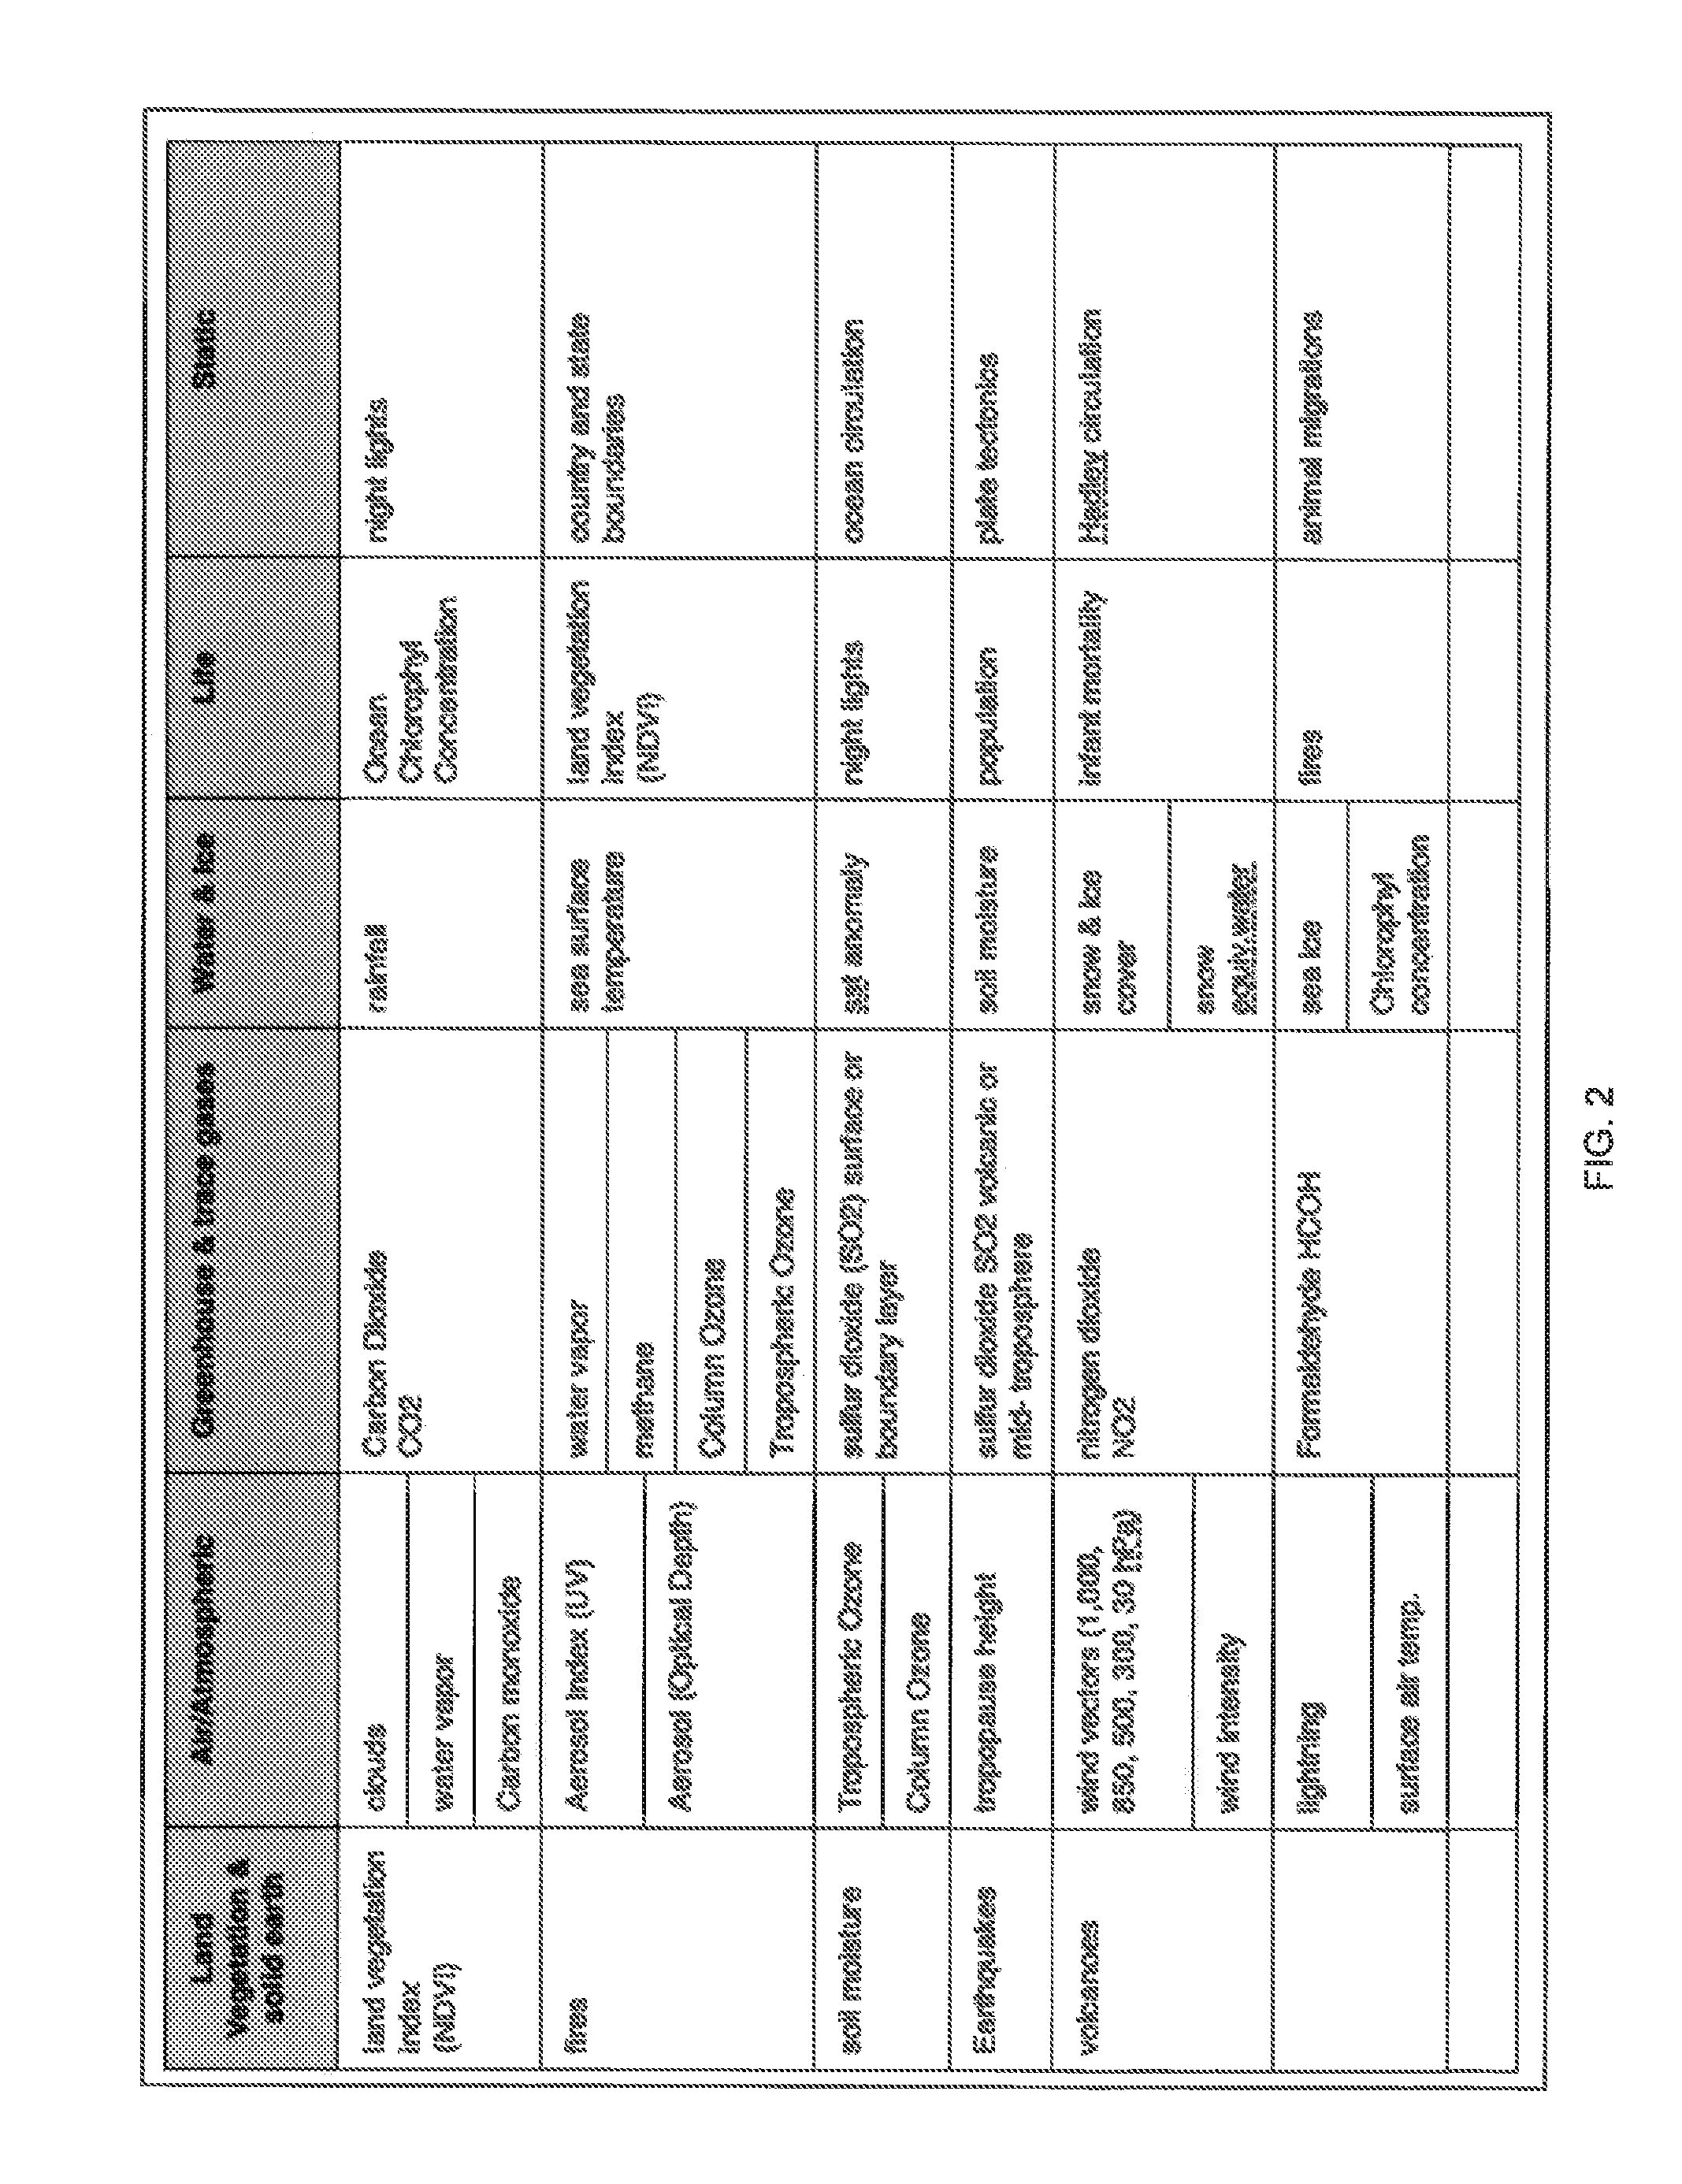 System and Method for Generating and Displaying Climate System Models